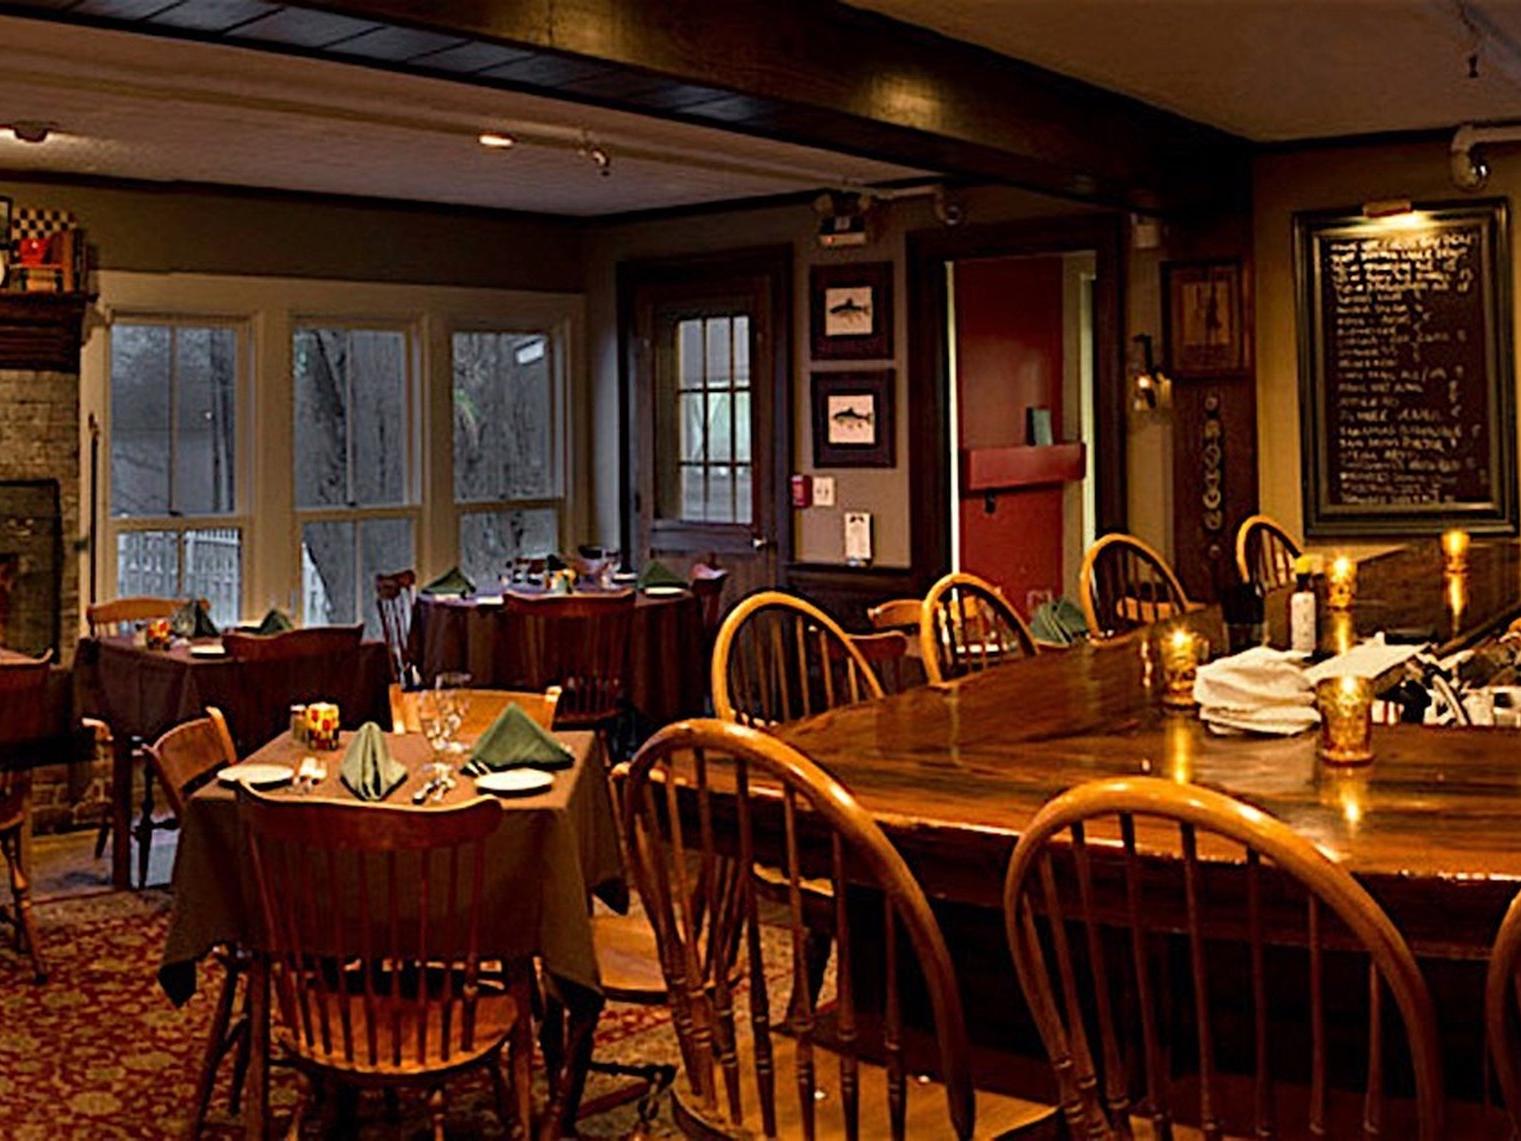 Dining - Best Restaurants in Manchester VT - The Manchester View